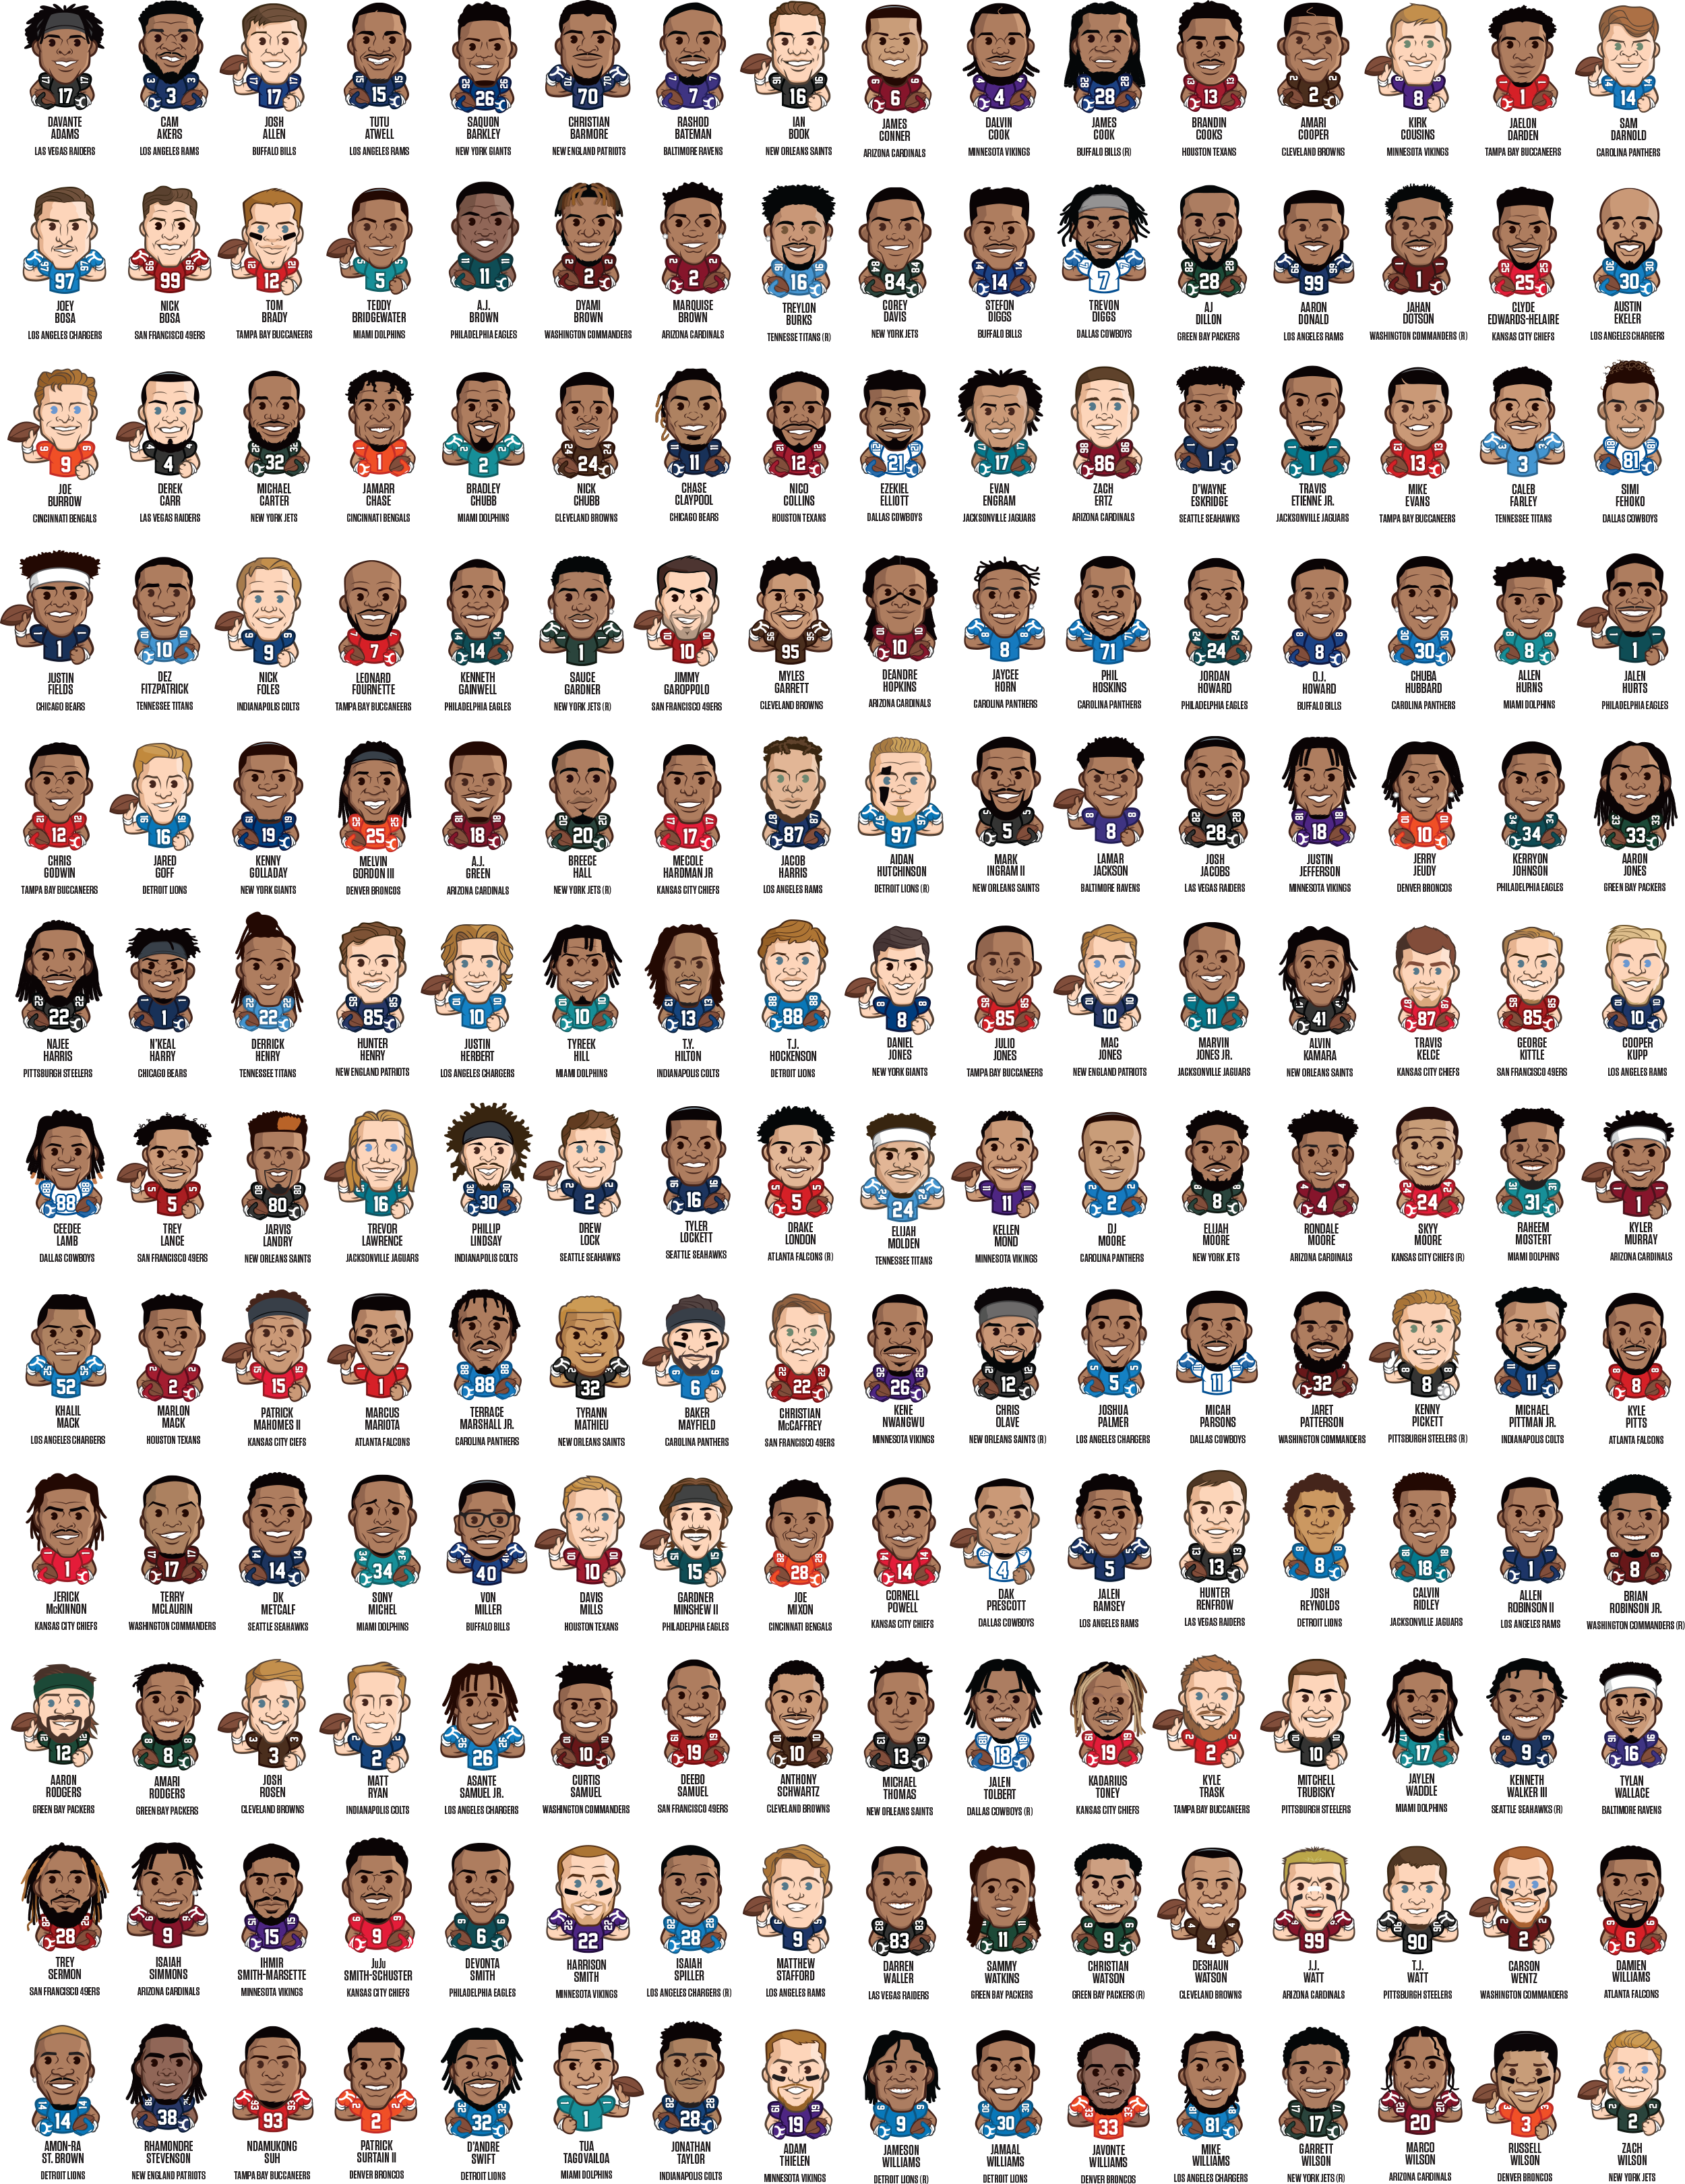 NFLPA Product Vision Pitch Decks and Player Emojis